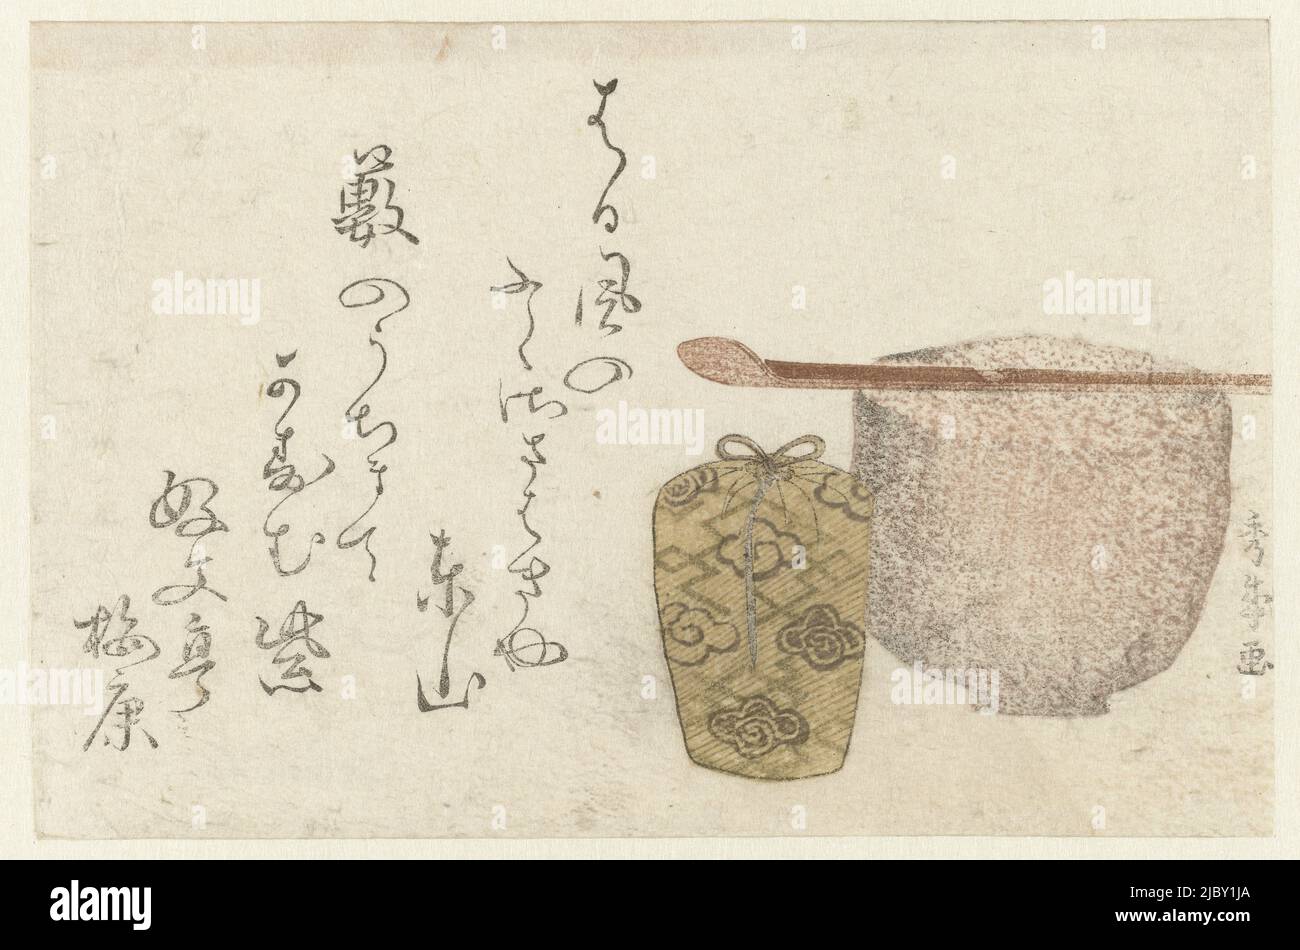 A ceramic tea bowl with bamboo spoon and packed tea van.  With poem by Kôbuntei Umeyasu about tea house of the famous tea master Rikyu, Supplies for the tea ceremony, print maker: Shûraku, (mentioned on object), Kôbuntei Umeyasu, (mentioned on object), Japan, c. 1800 - c. 1805, paper, colour woodcut, h 115 mm × w 175 mm Stock Photo